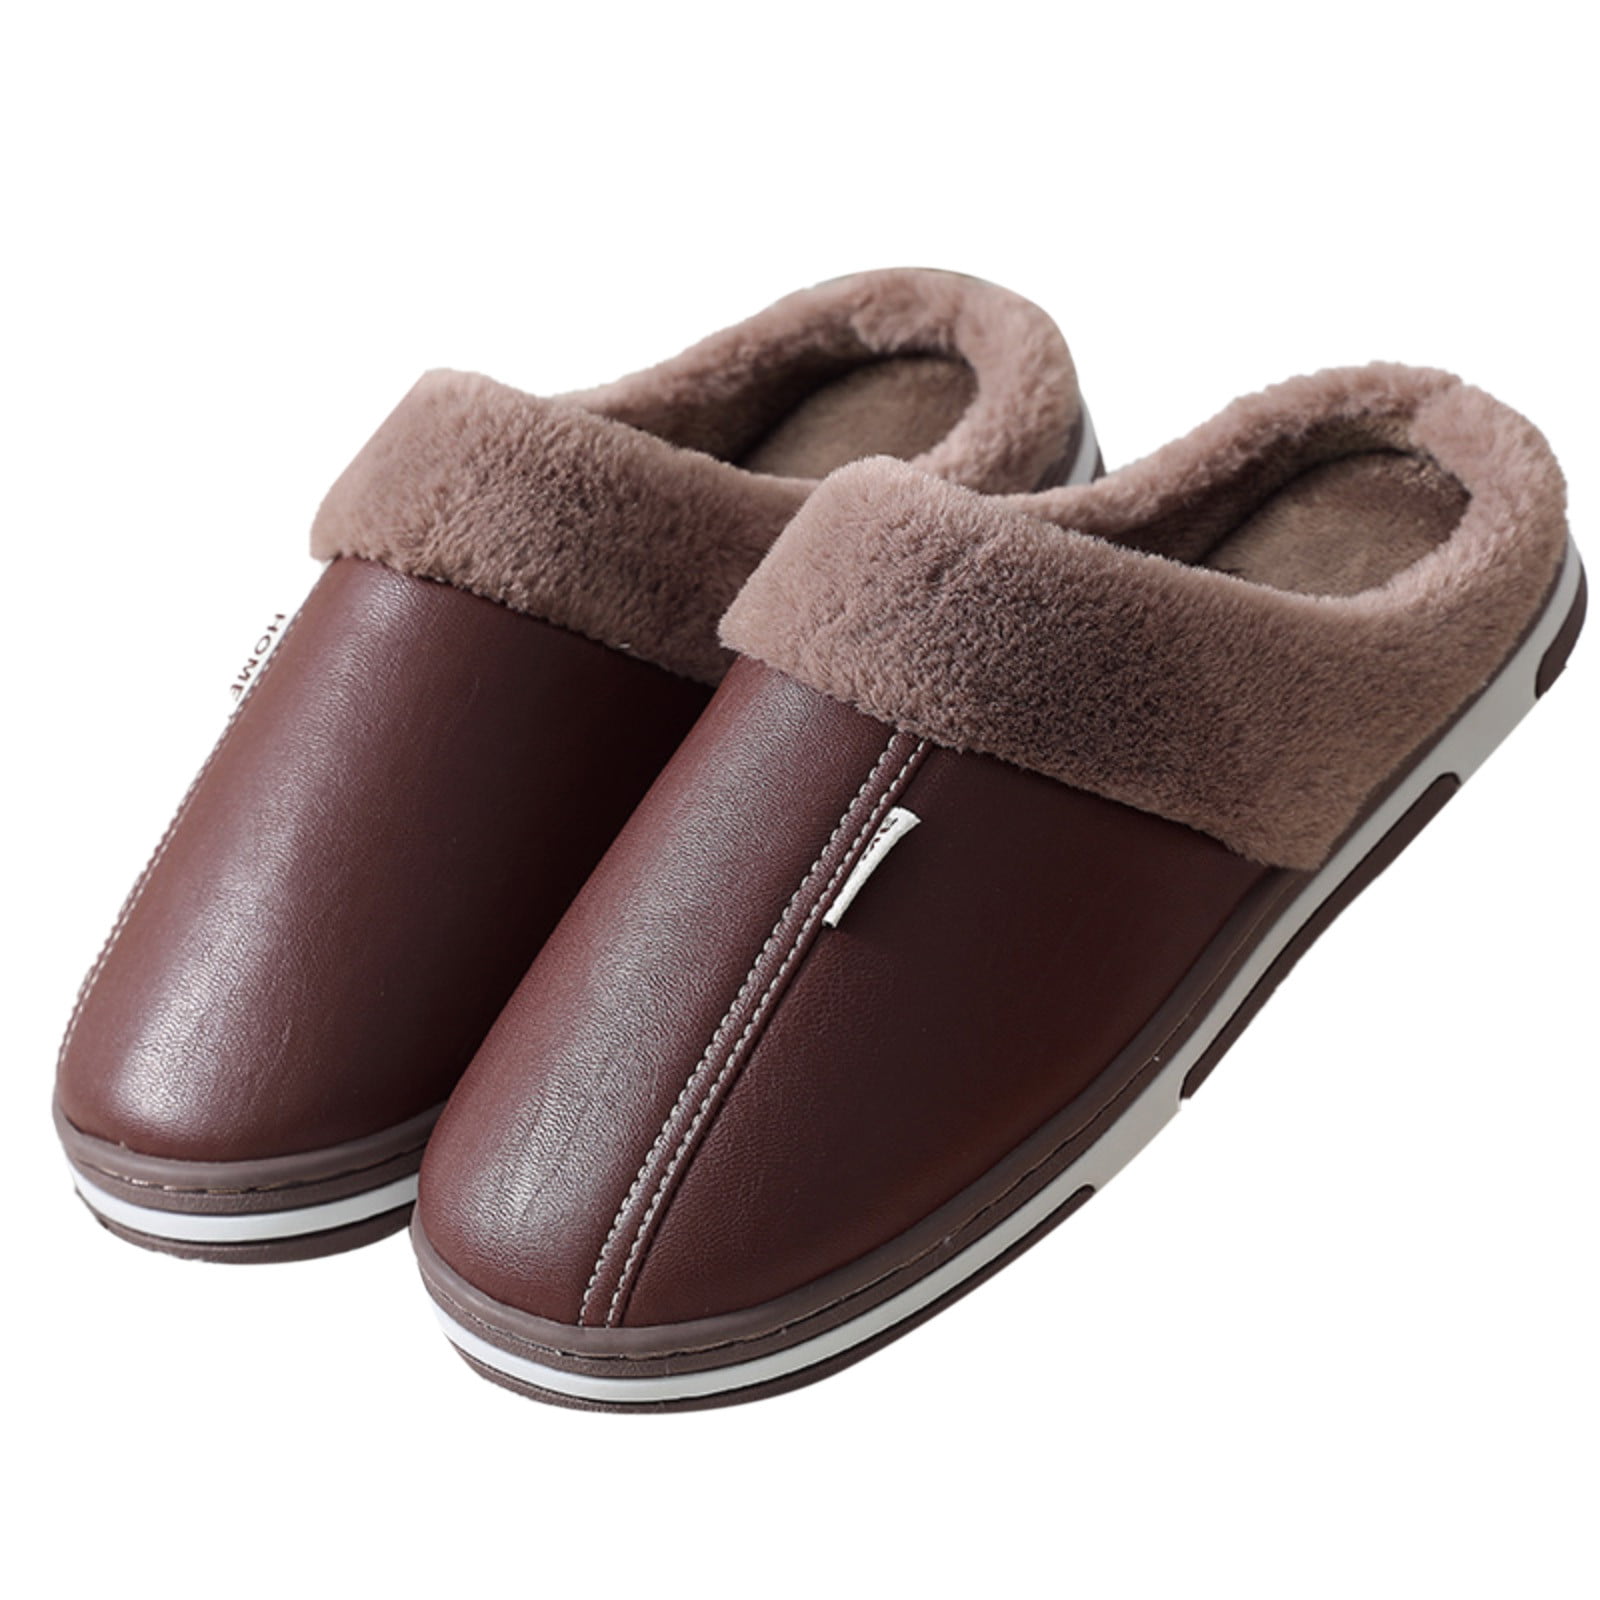 Brown Flossy Style Memory Foam Slippers UK10 Soft & Comfortable With Rubber Sole